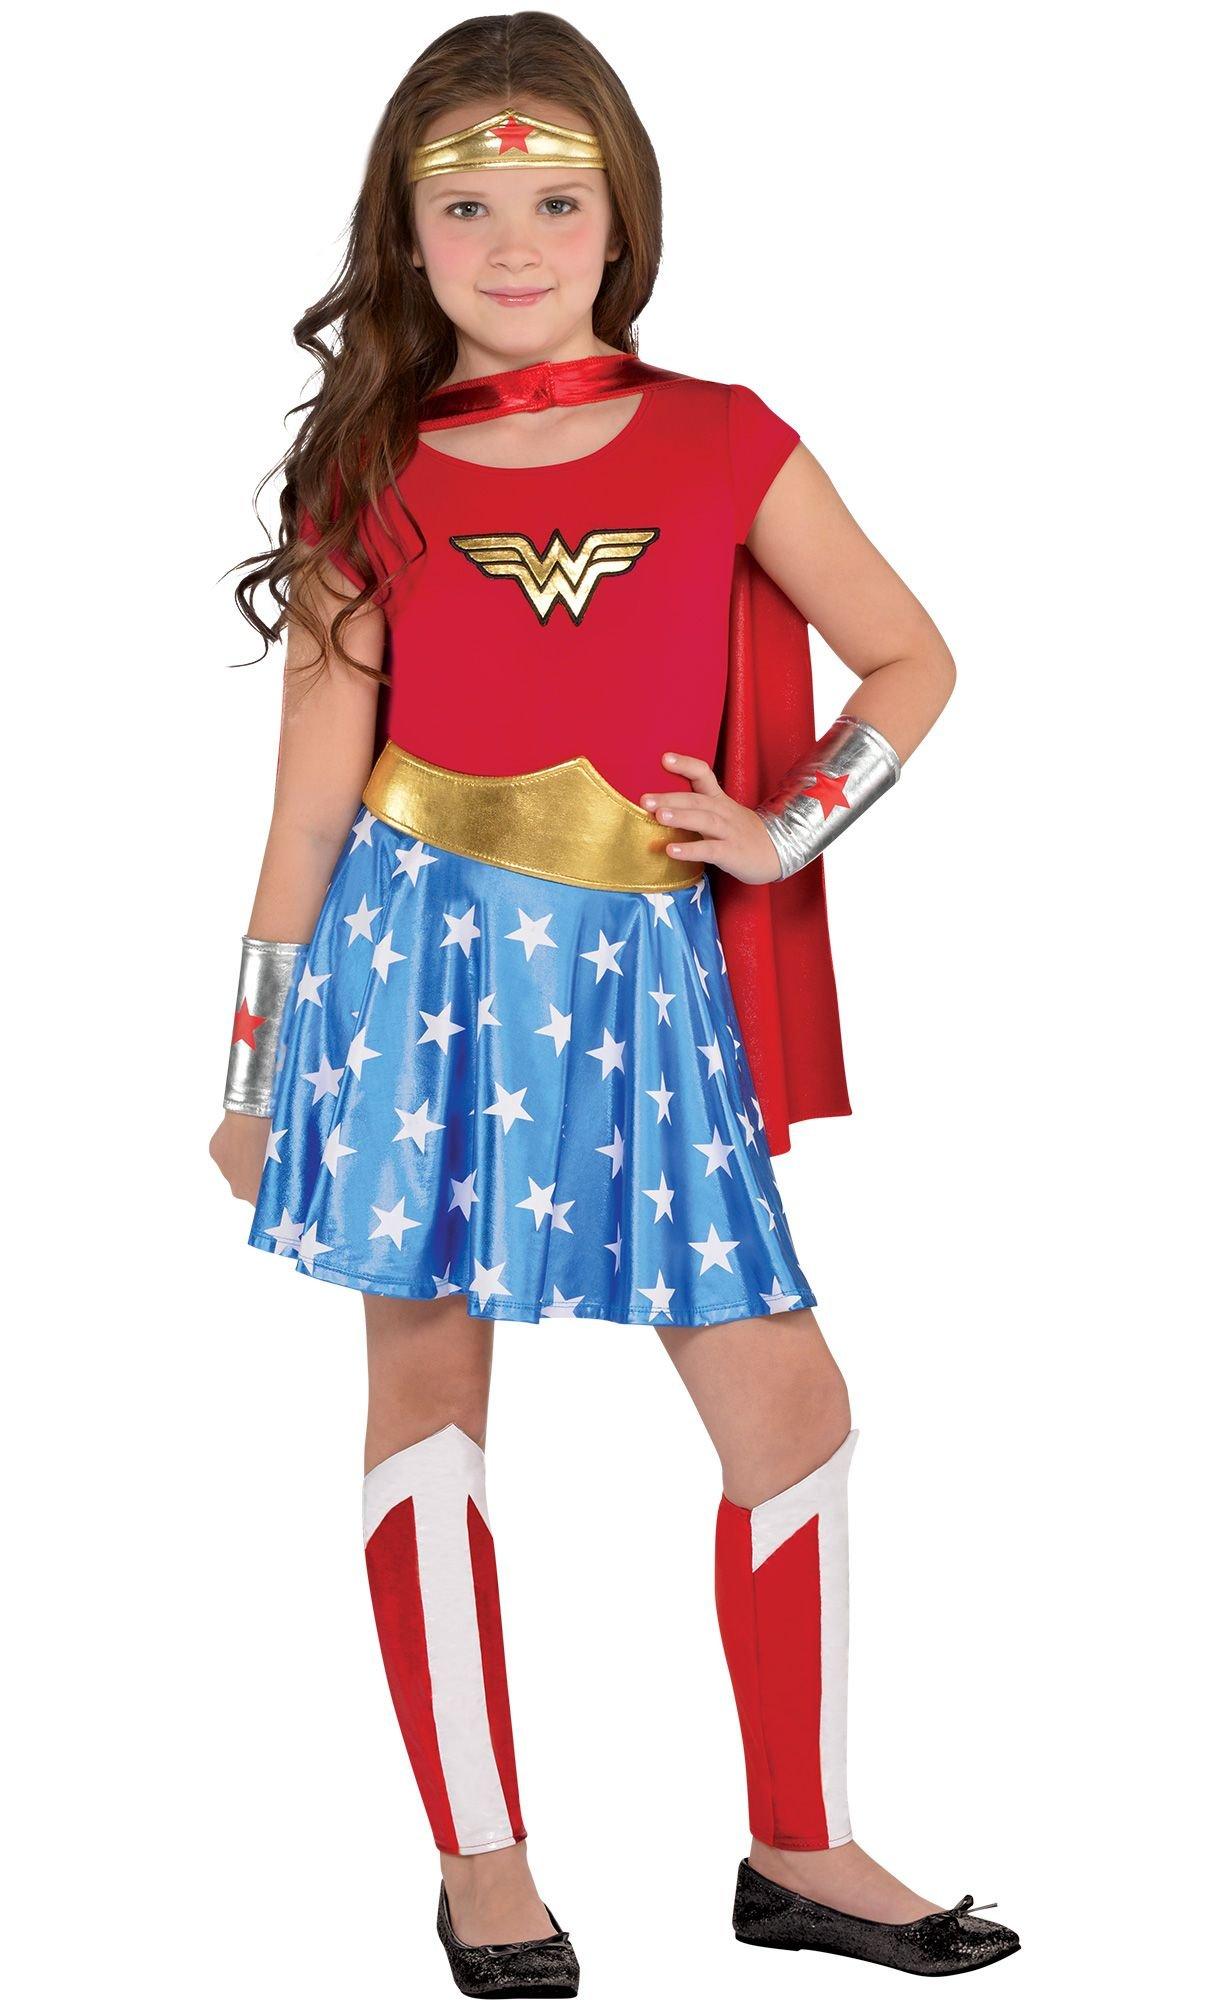 Costumes USA Wonder Woman Costume for Girls, Size Medium, Includes A Dress, A Headband, Leg Warmers, A Cape, and More